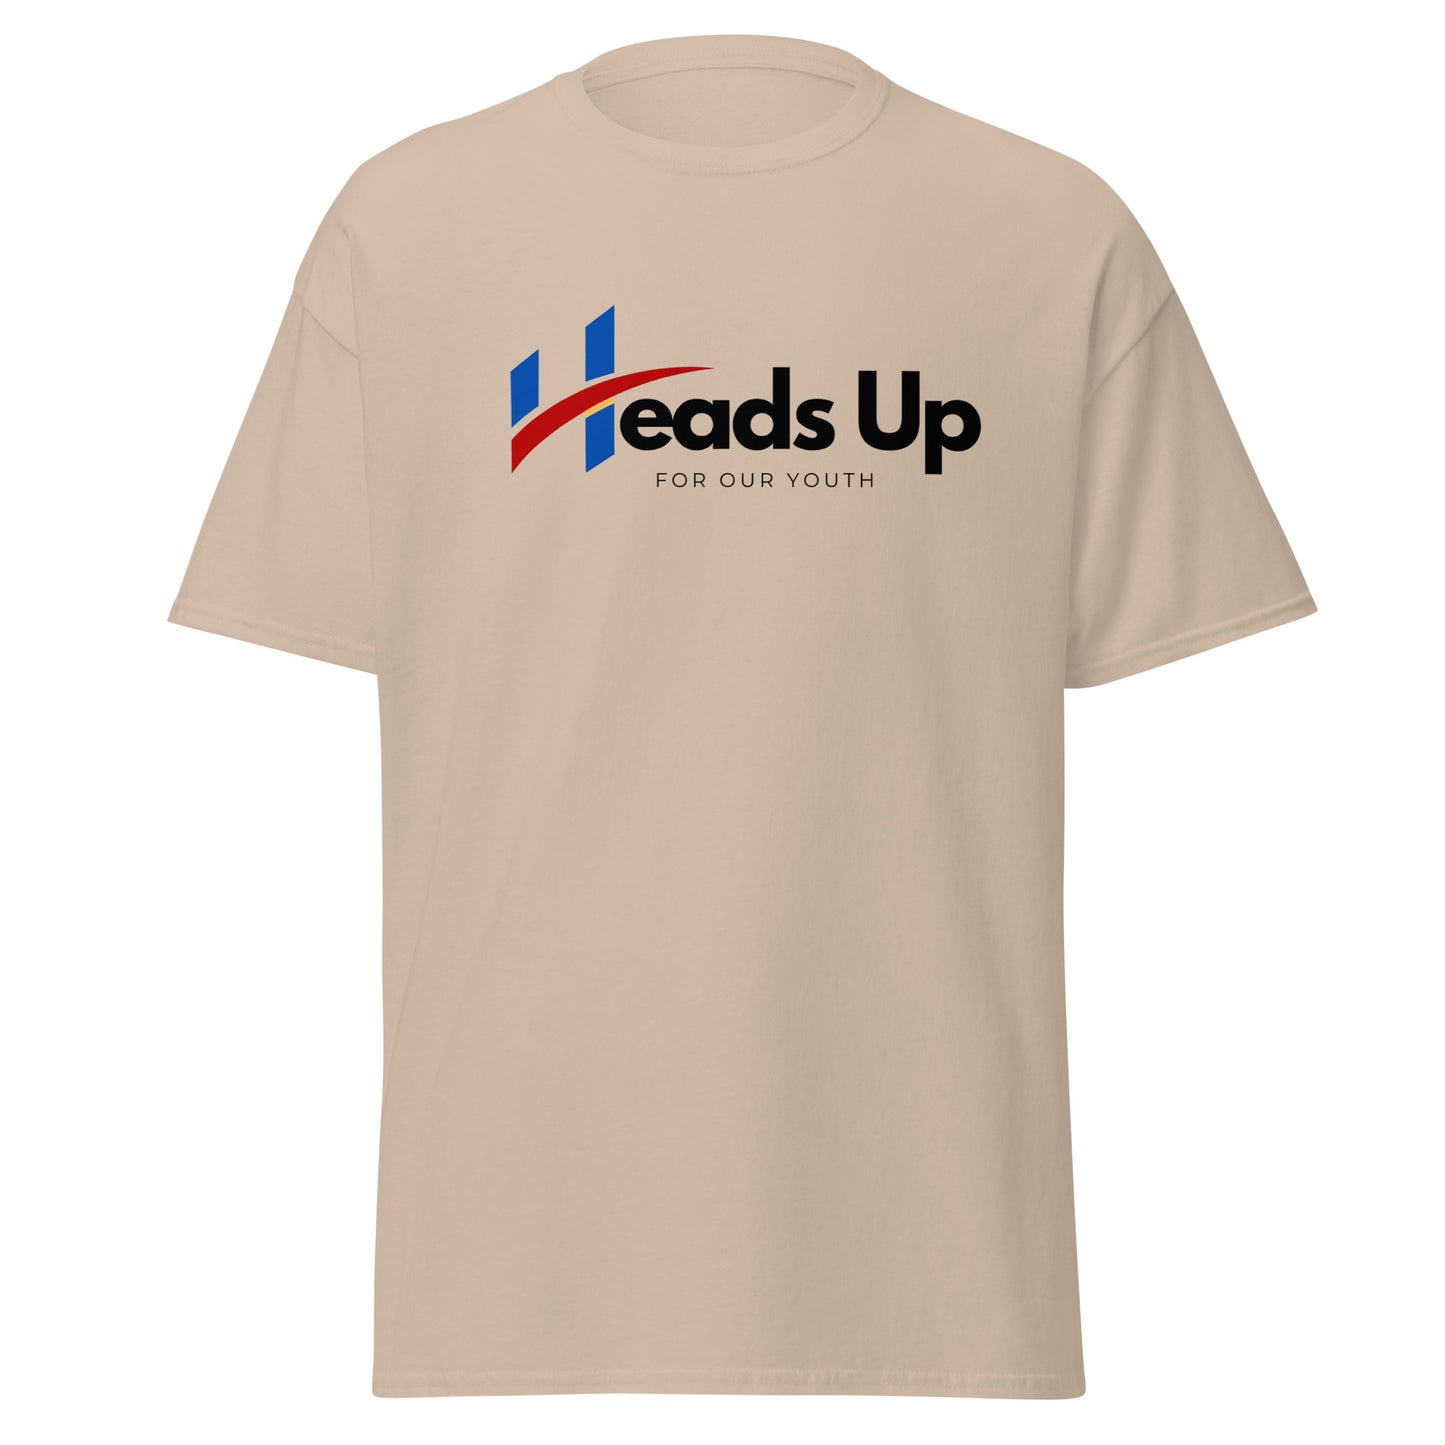 Heads Up For Our Youth Men's classic tee